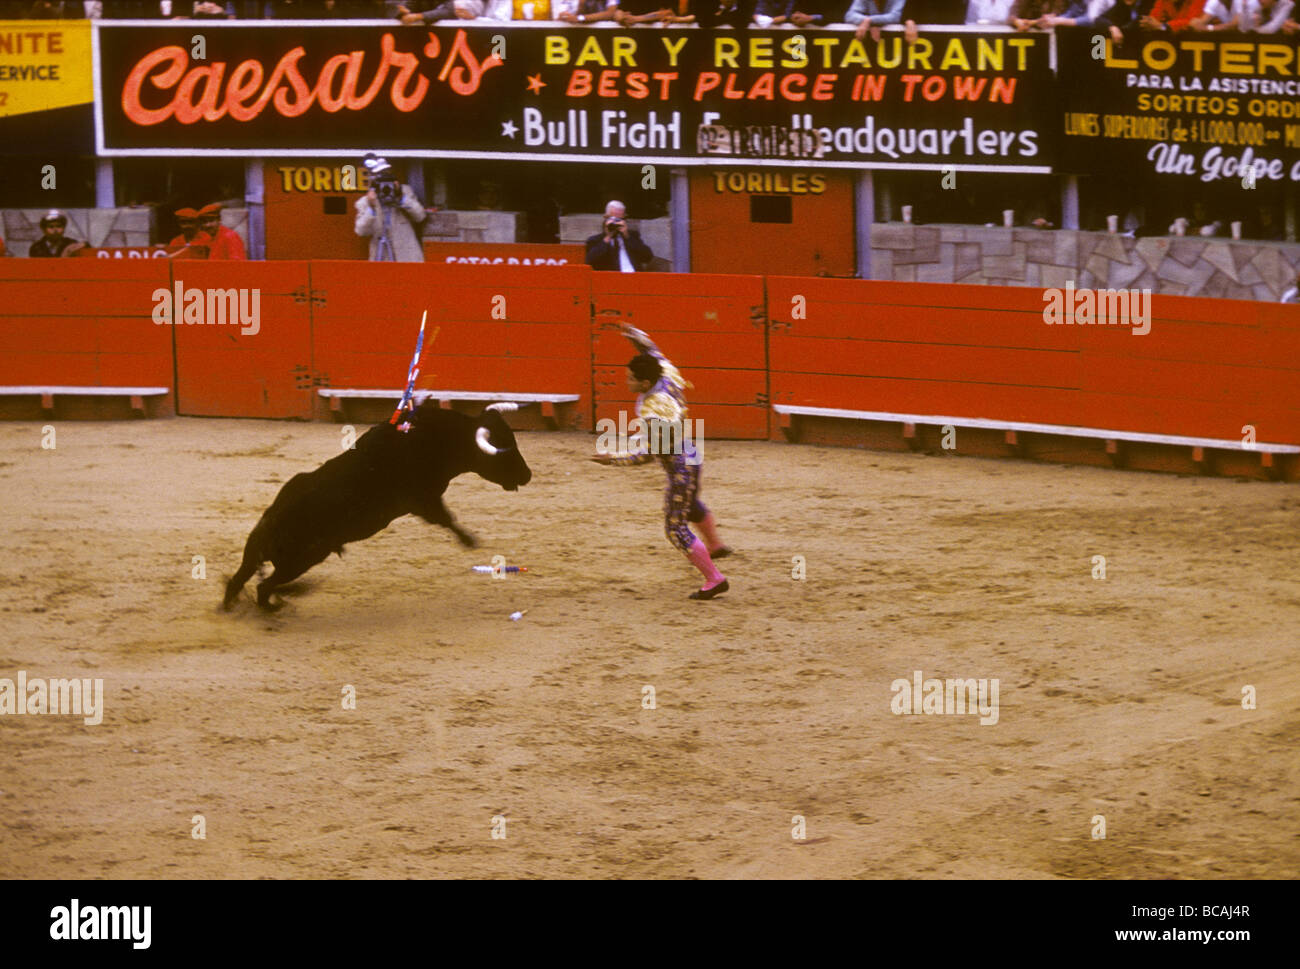 A man fights a bull in Tijuana, Mexico in 1960. Stock Photo